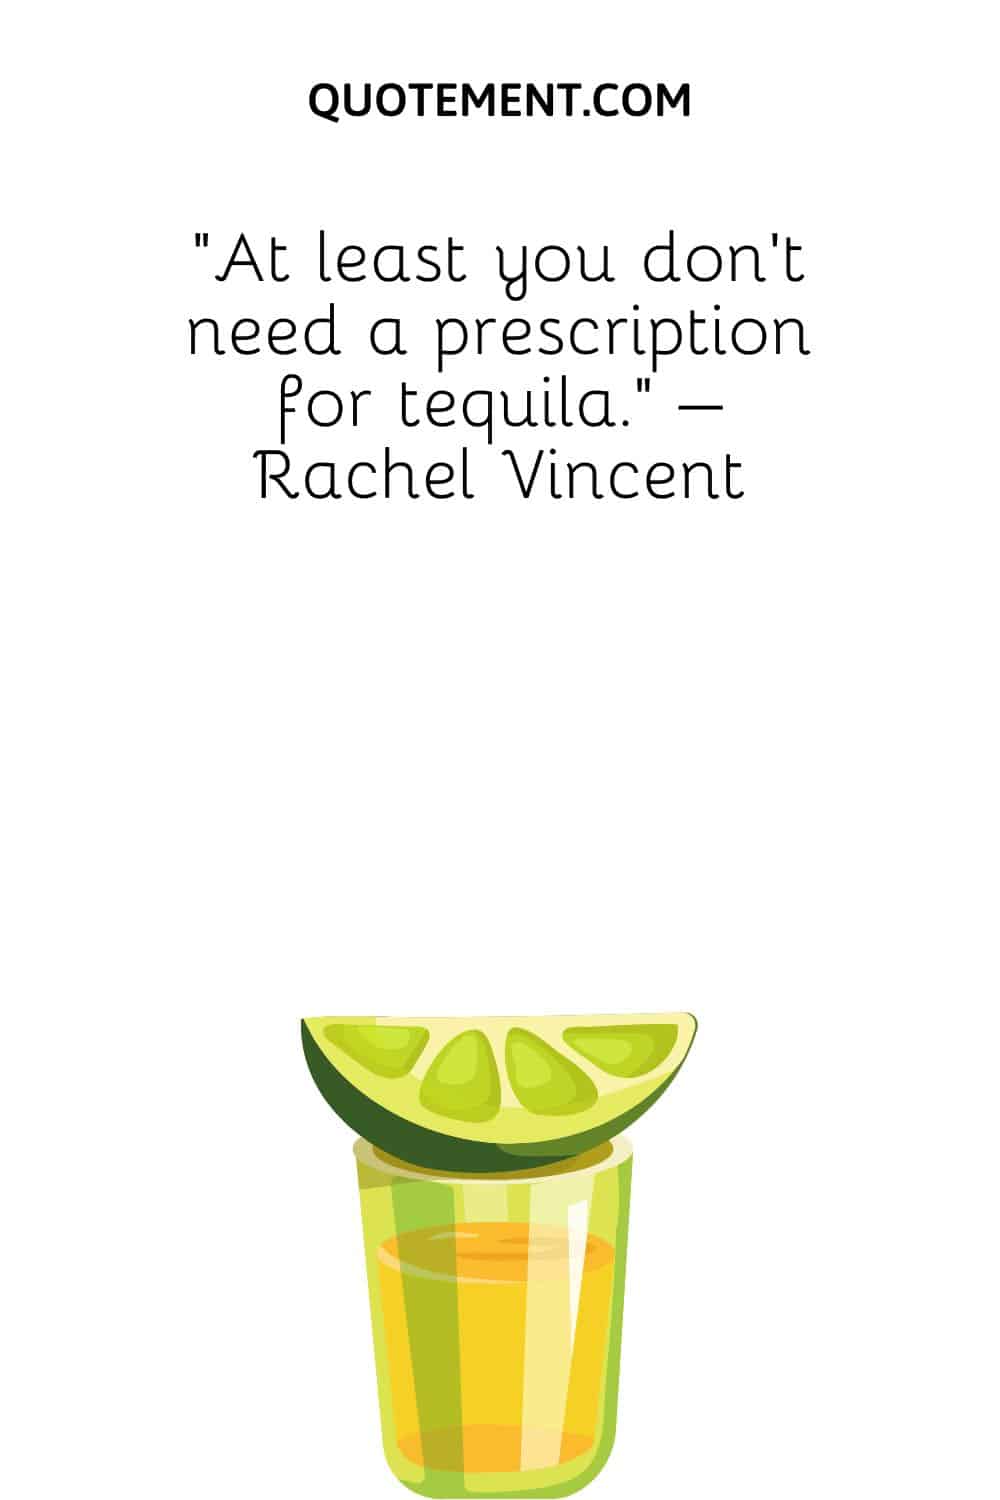 At least you don’t need a prescription for tequila